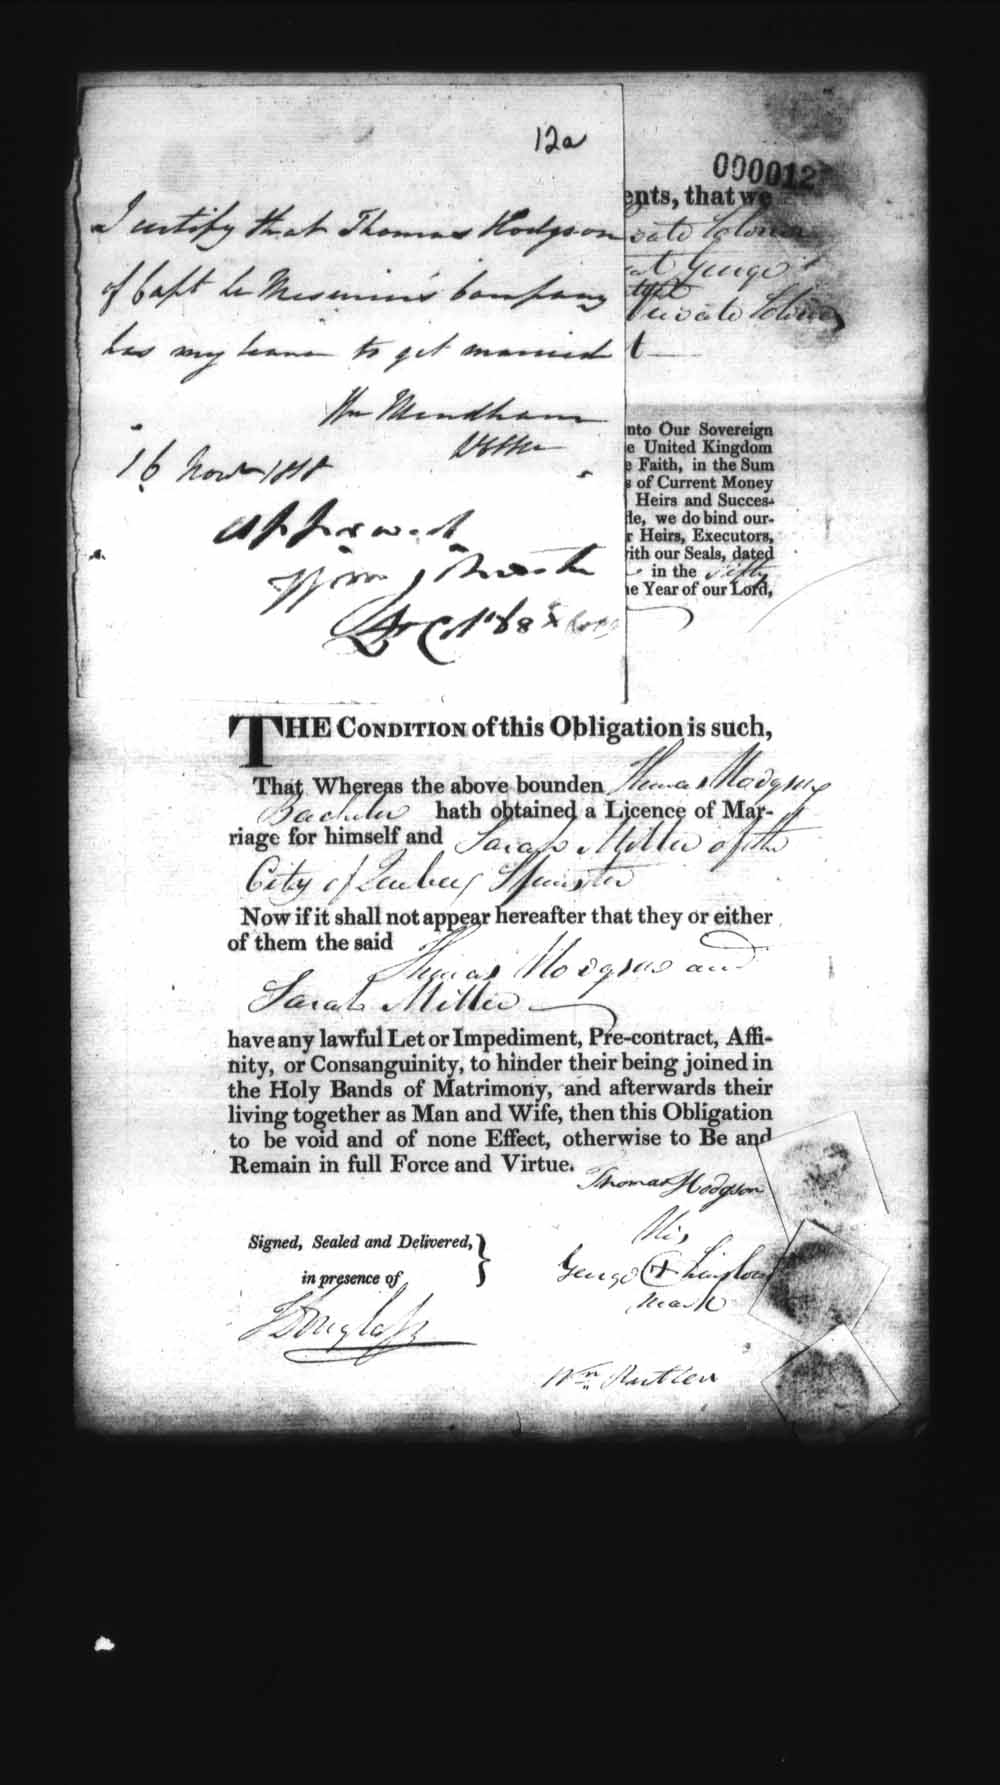 Digitized page of Upper and Lower Canada Marriage Bonds (1779-1865) for Image No.: e008235820